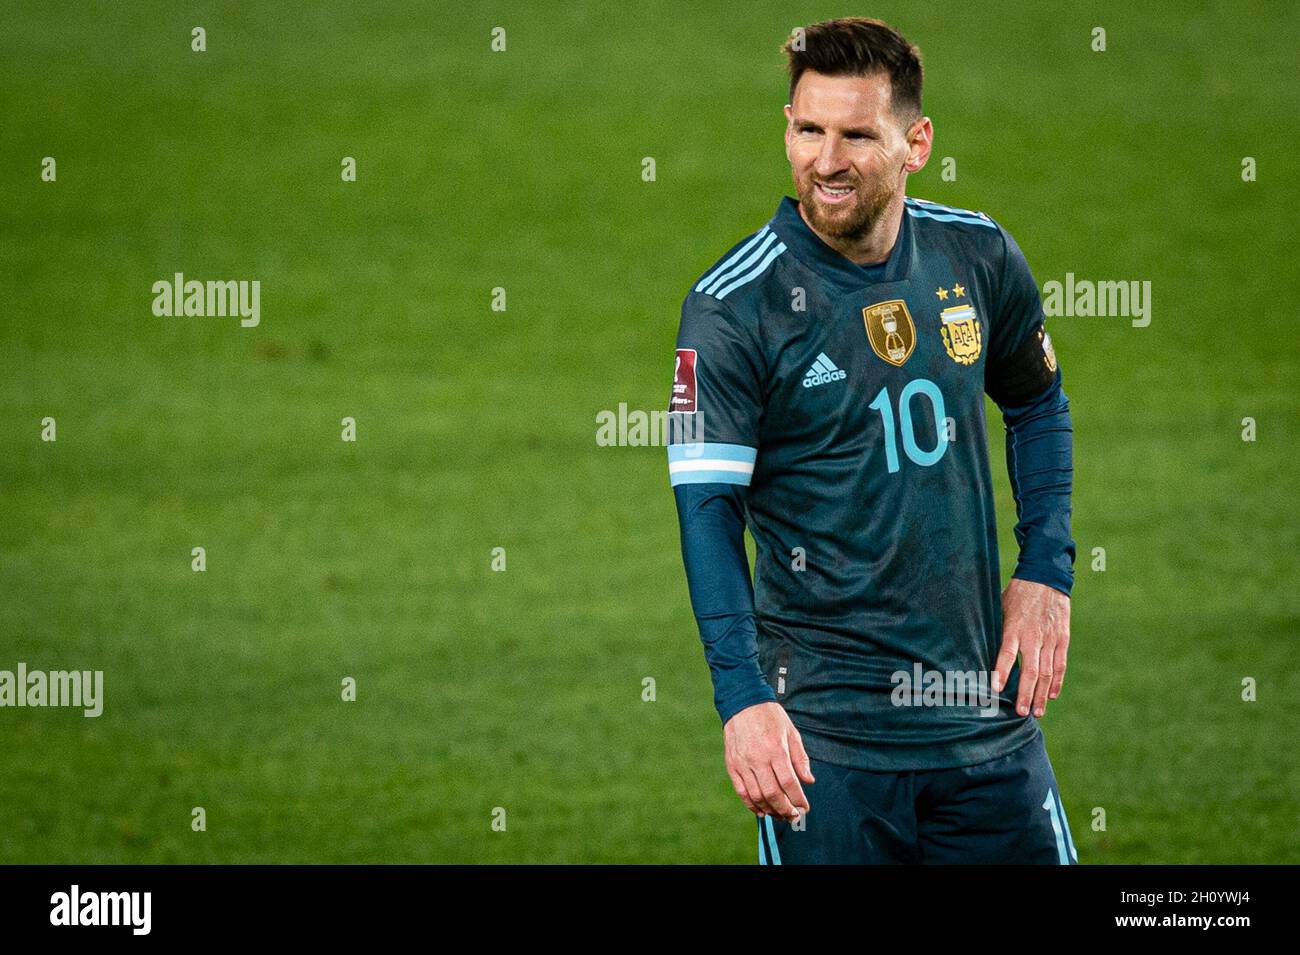 Buenos Aires, Argentina - 14 Oct 2021, Lionel Messi seen during the FIFA  World Cup Qatar 2022 Qualifiers match between Argentina and Peru at El  Monumental. Final score; Argentina 1:0 Peru. (Photo